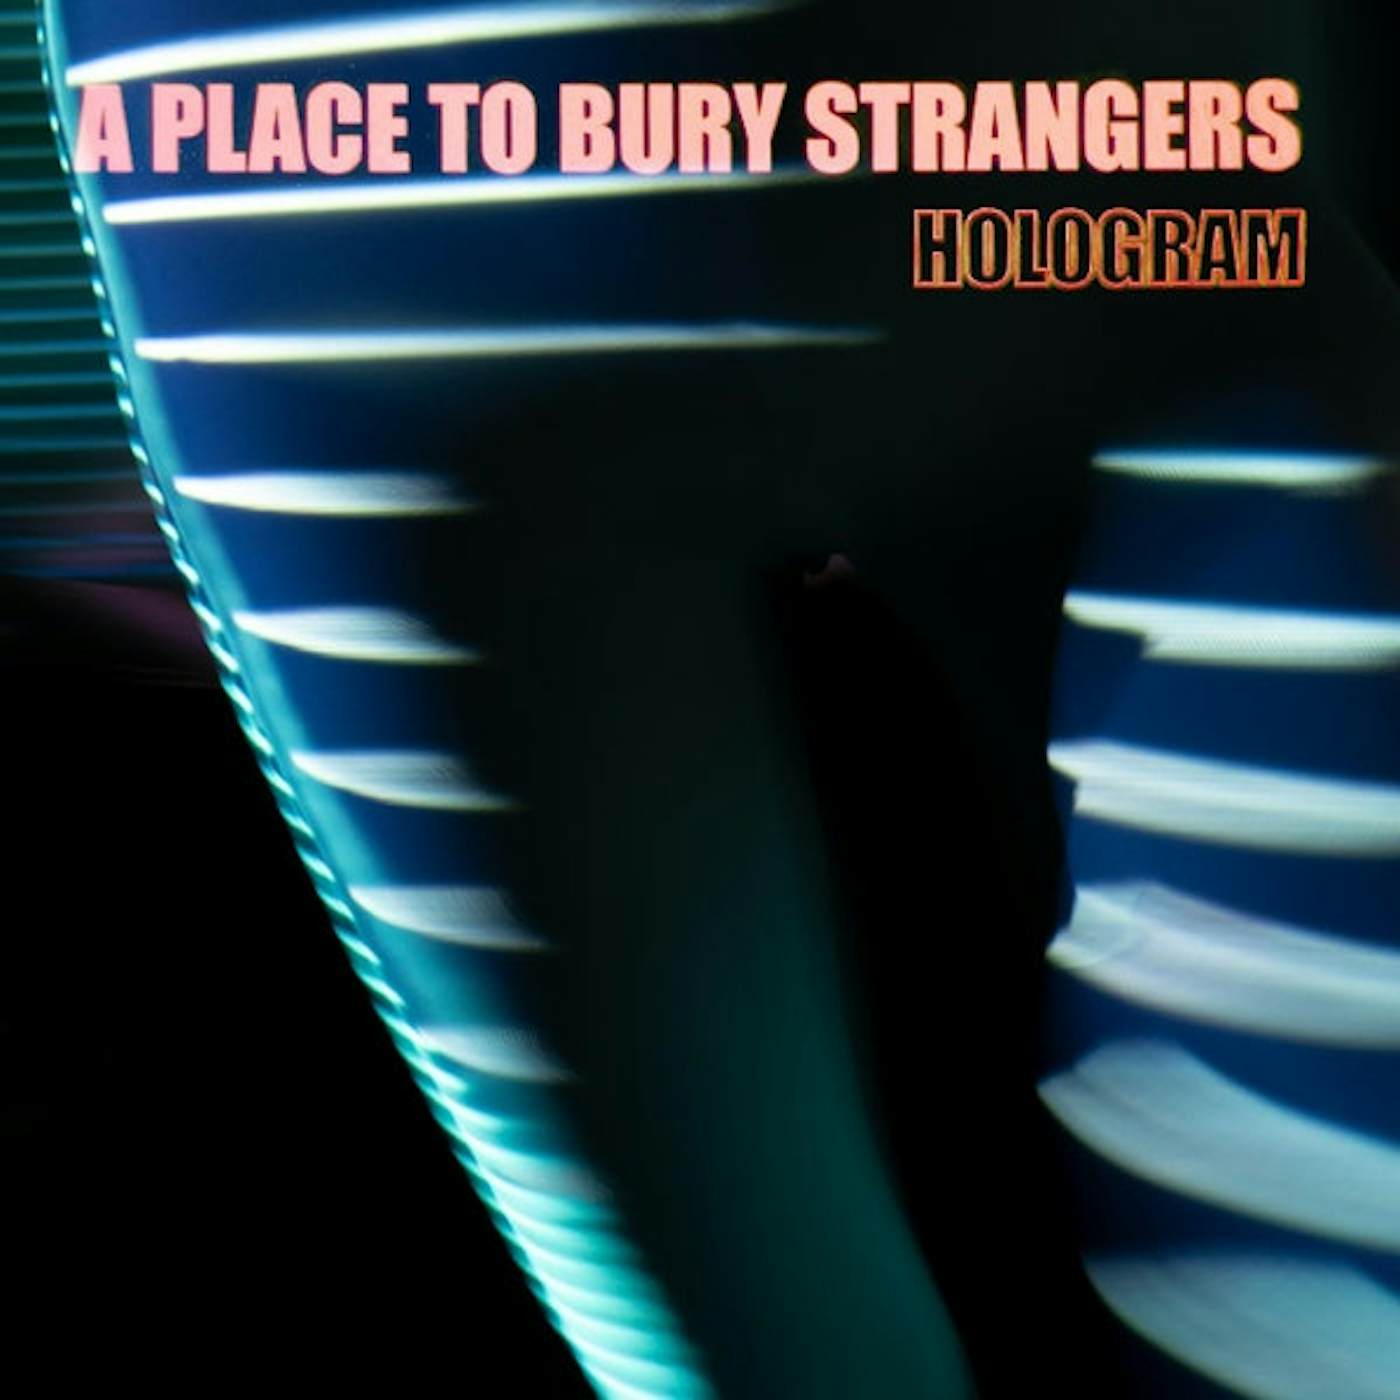 A Place To Bury Strangers Hologram Vinyl Record